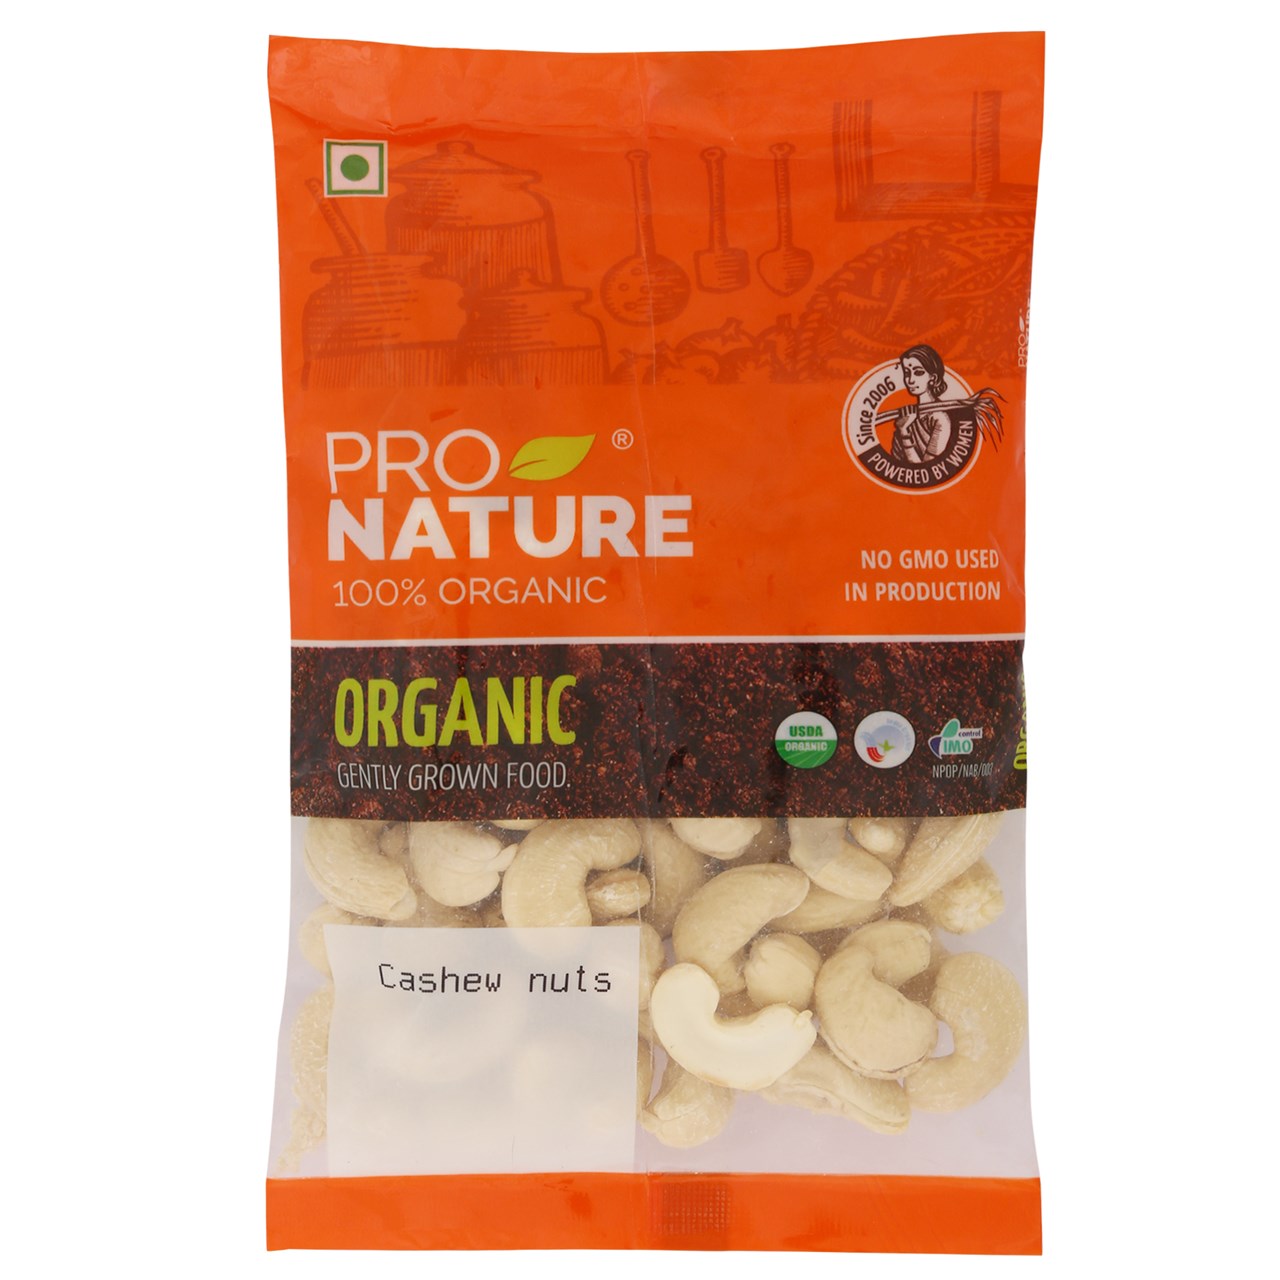 Picture of Cashew nuts 100g